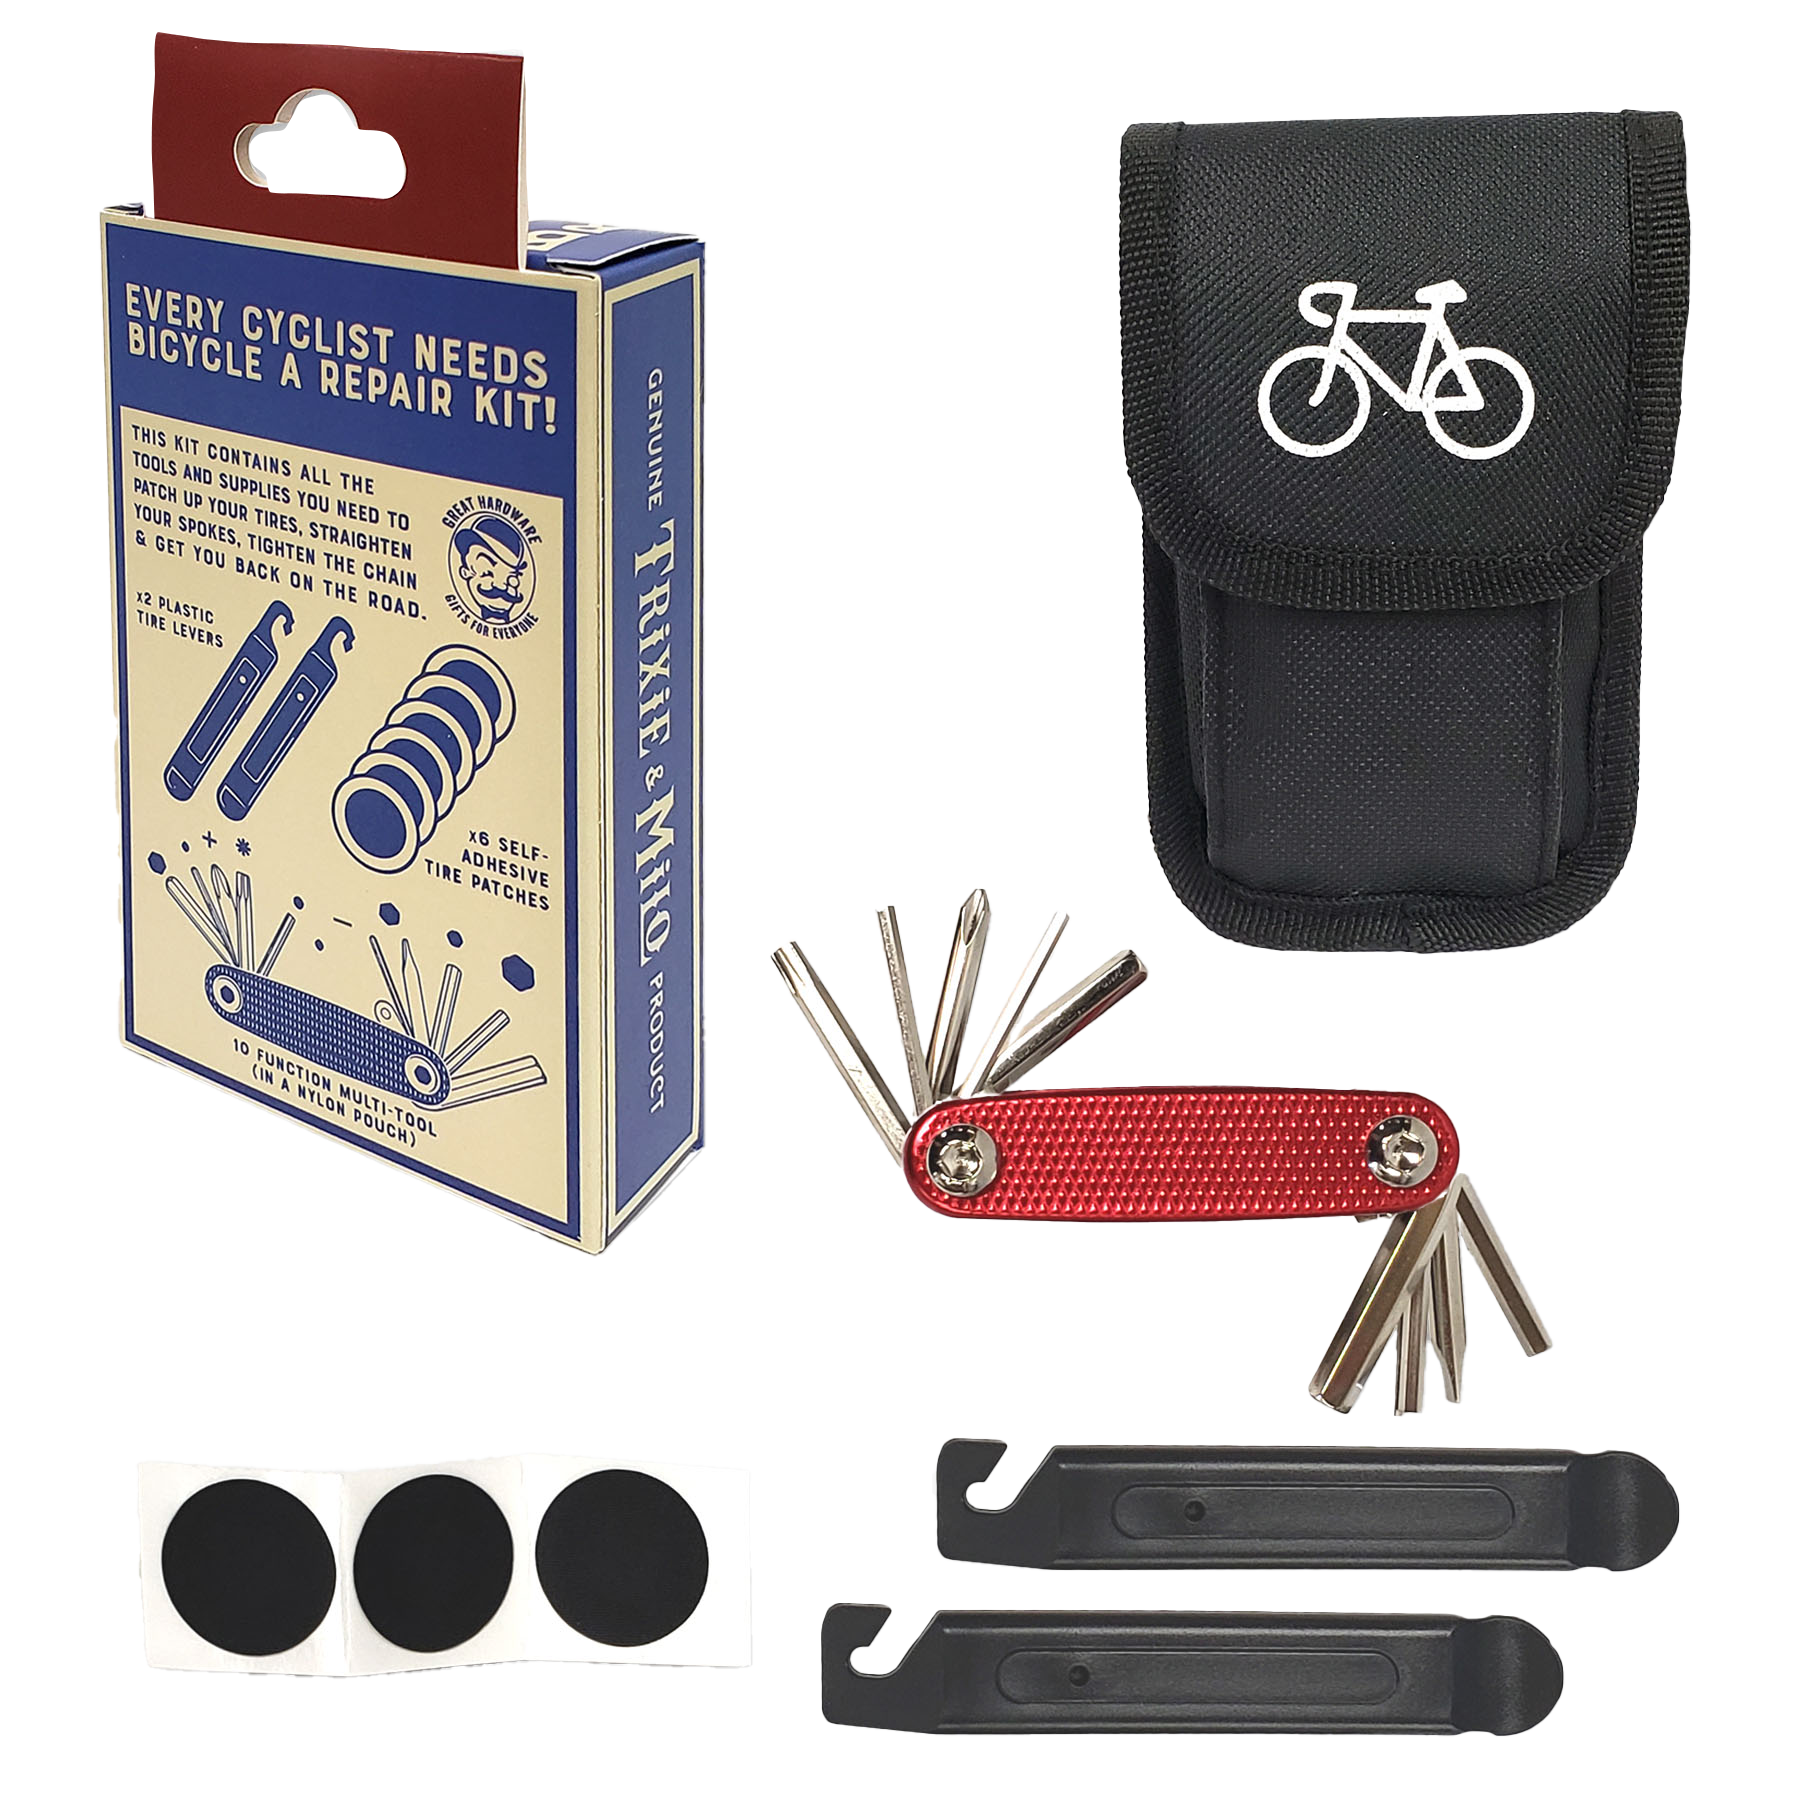 All tools included for Bicycle Repair Kit Multifunction Utility Tool Whether outdoors mountain biking, or coasting across the city on your fixie, this bike repair kit is a cyclists must-have.